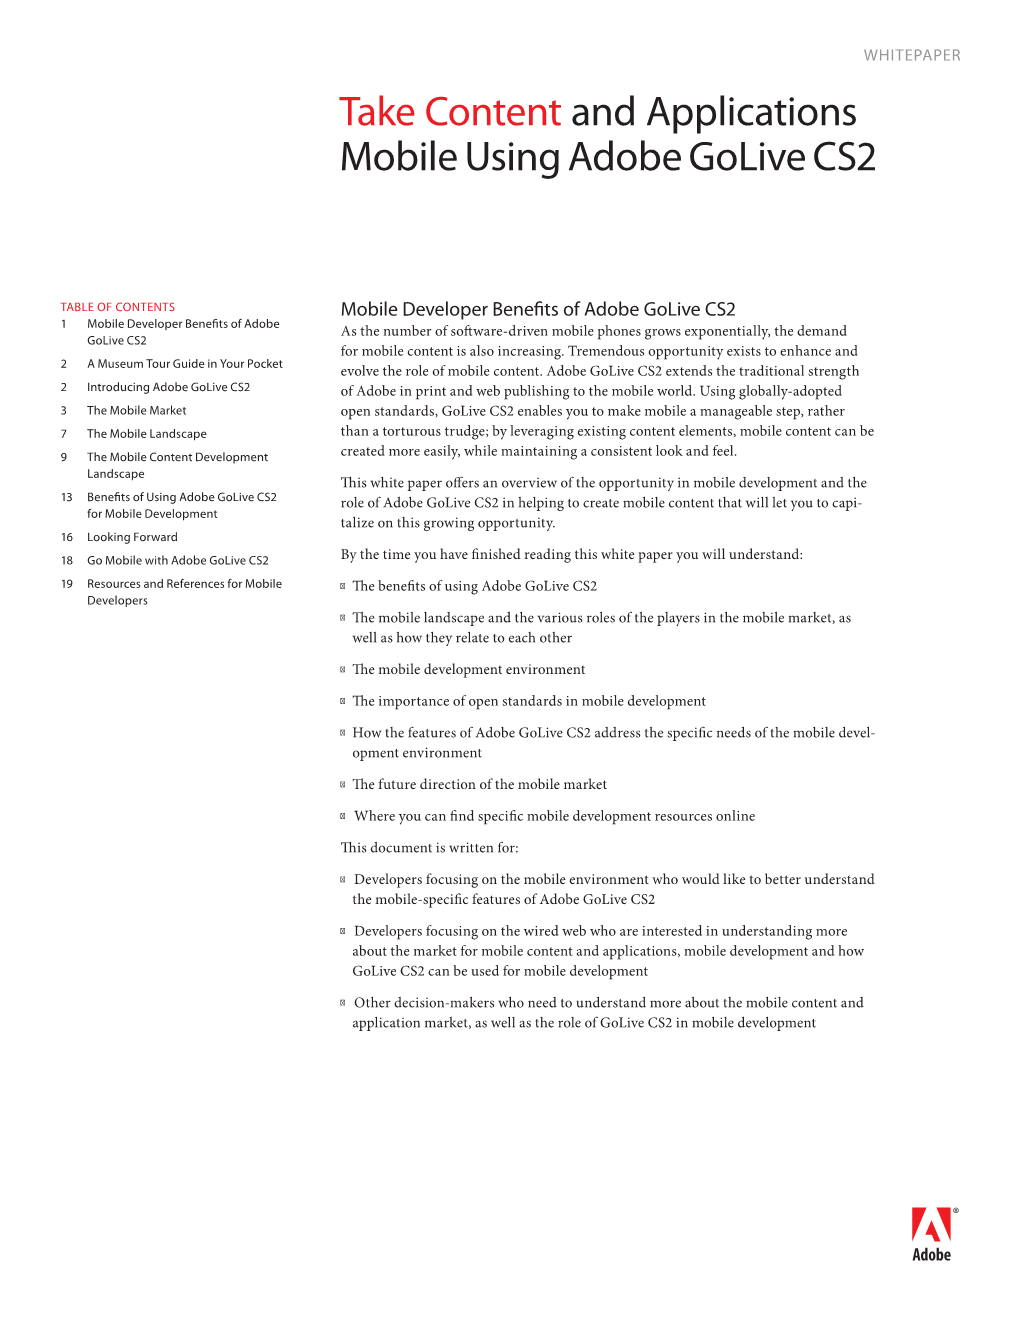 Take Content and Applications Mobile Using Adobe Golive CS2